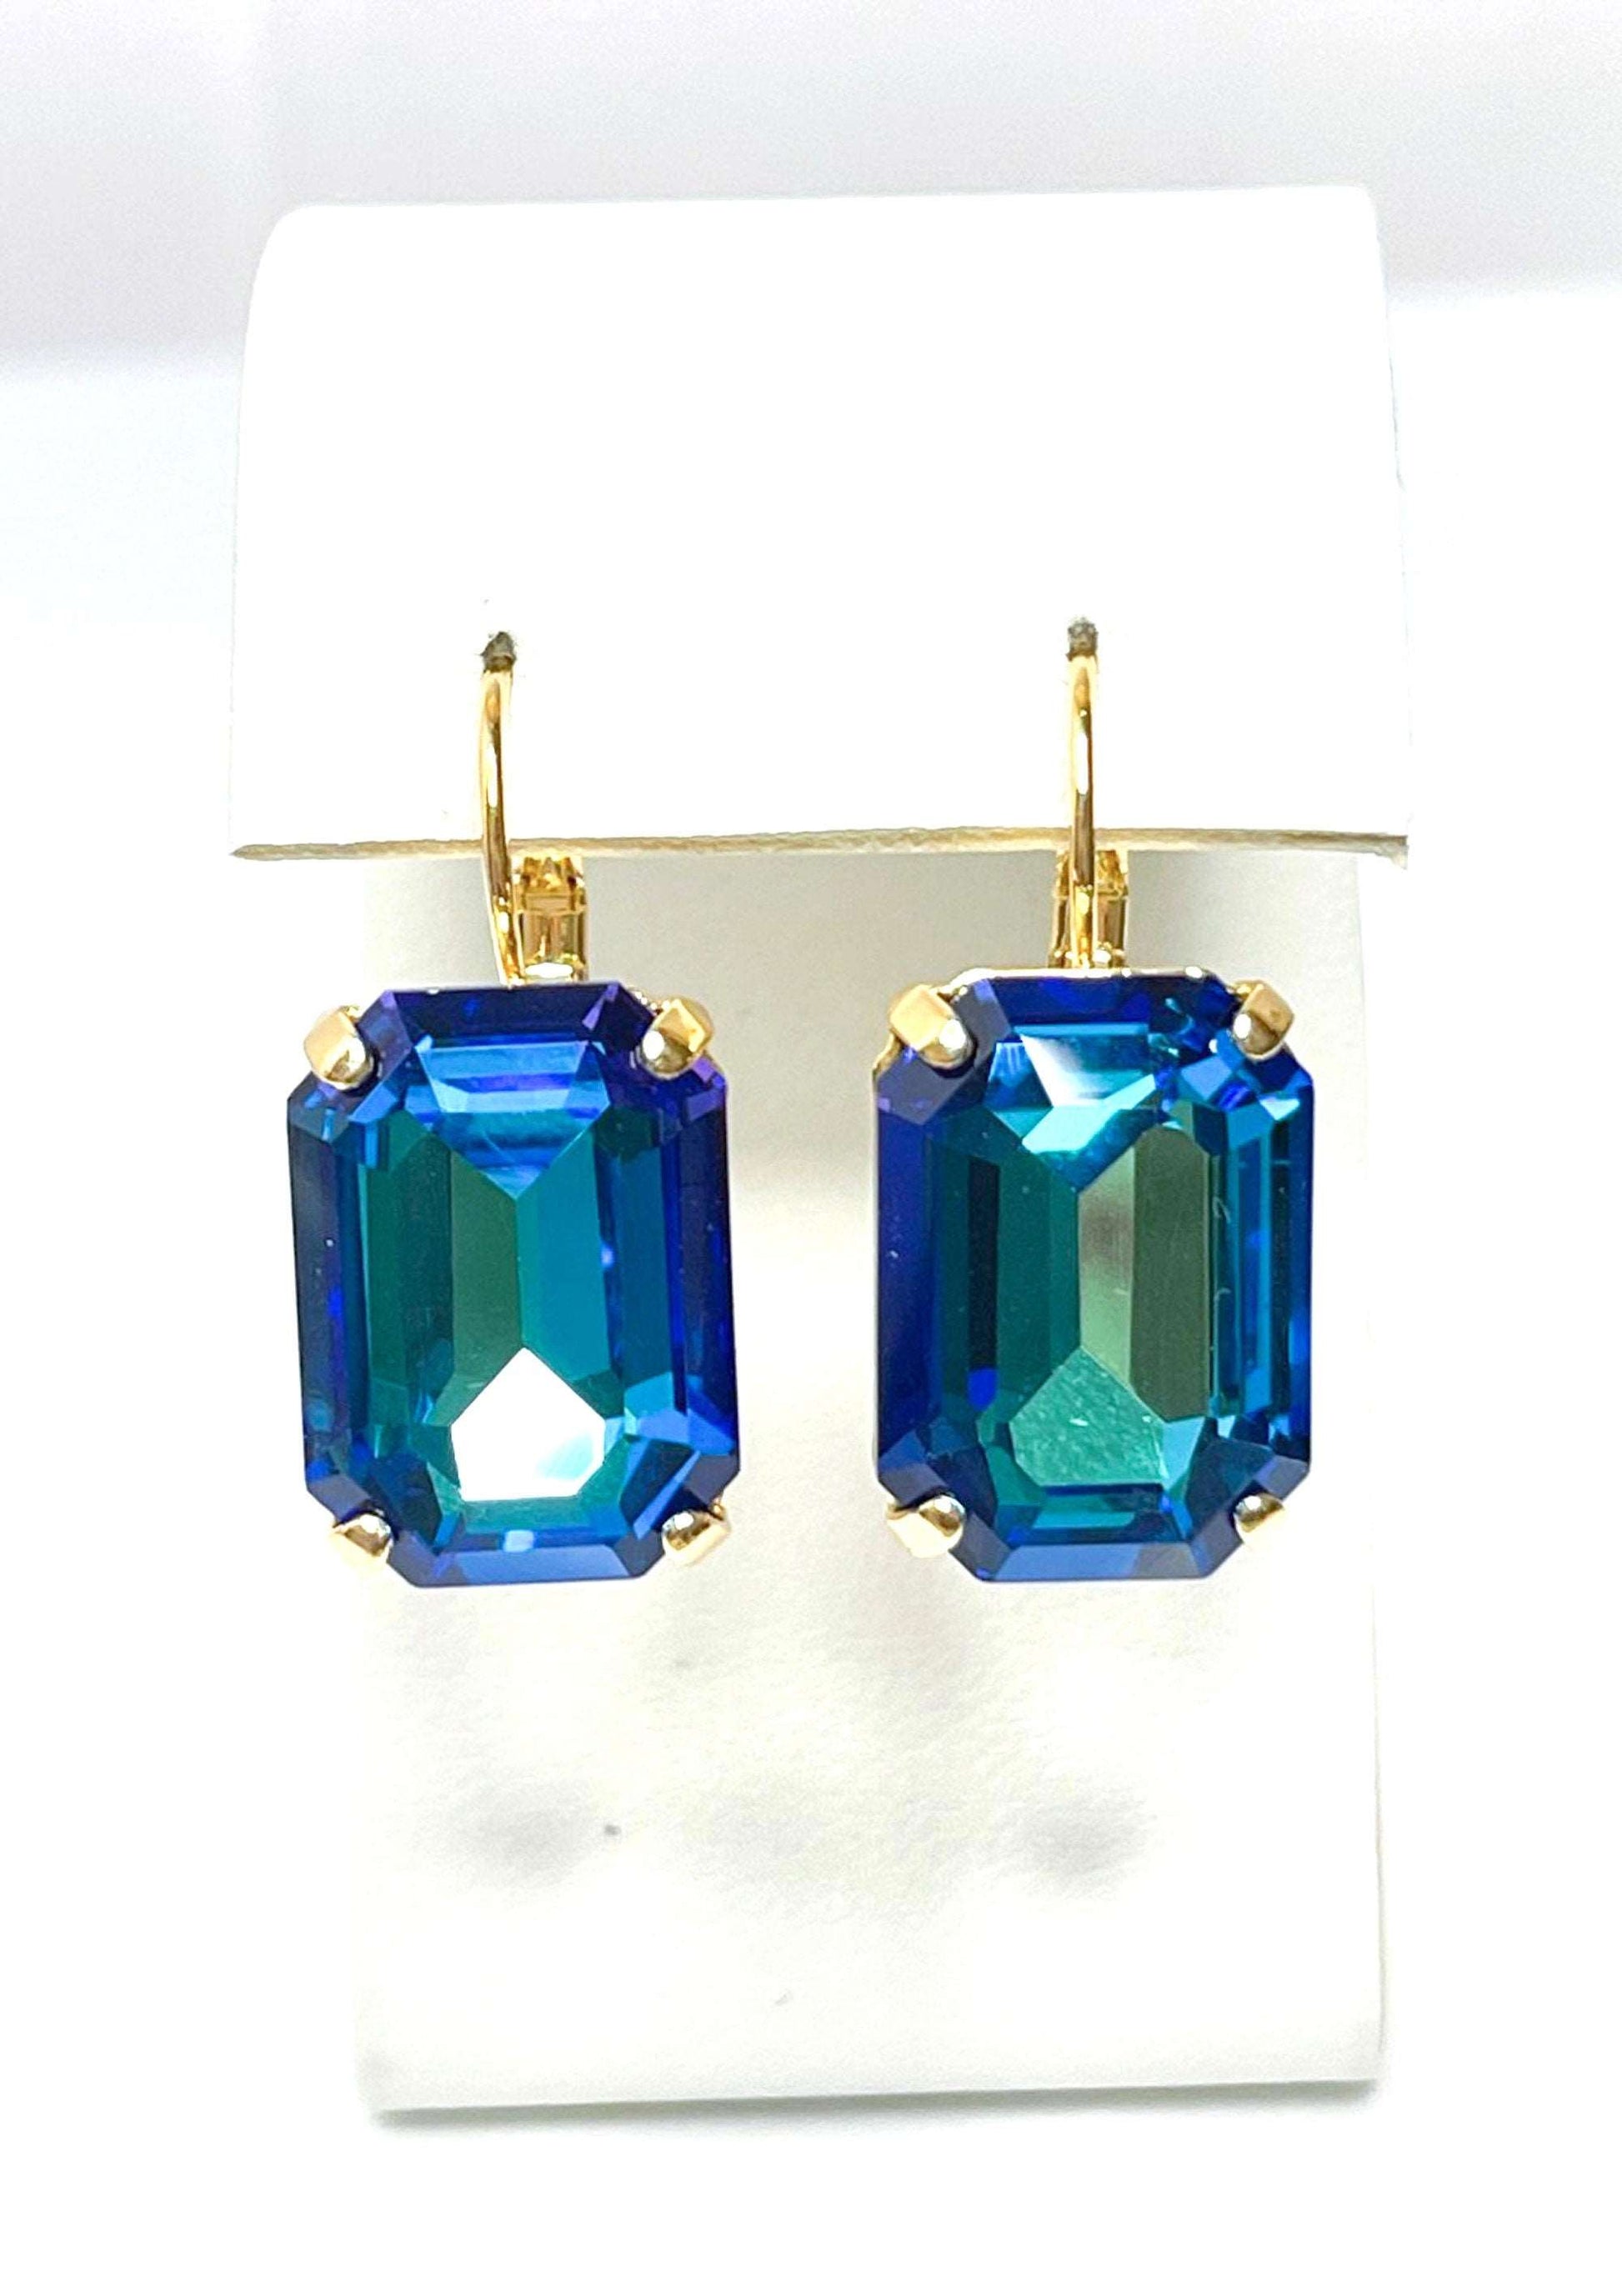 Bermuda Blue Crystal Earrings, Gold Plated Drops, Vintage Style, Georgian Collet, Rectangle Statement Drops, Earrings For Women